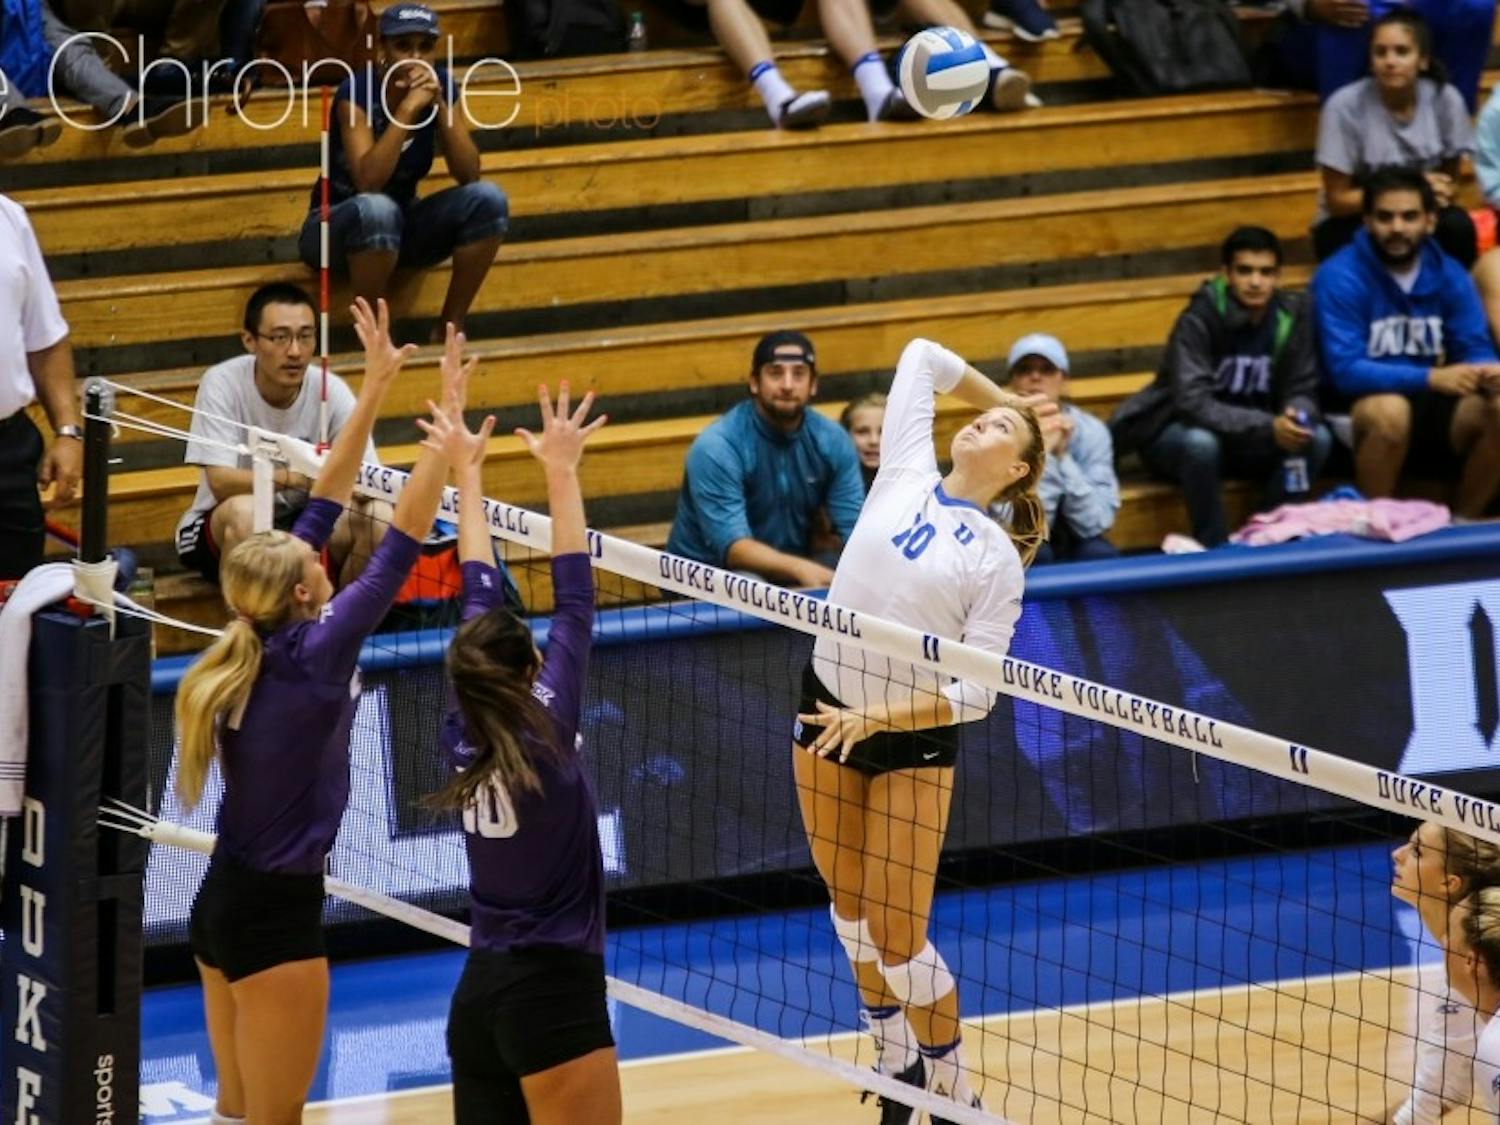 Junior middle blocker Anna Kropf peaked at the right time late in Wednesday’s match to spark the Blue Devils’ five-set win.